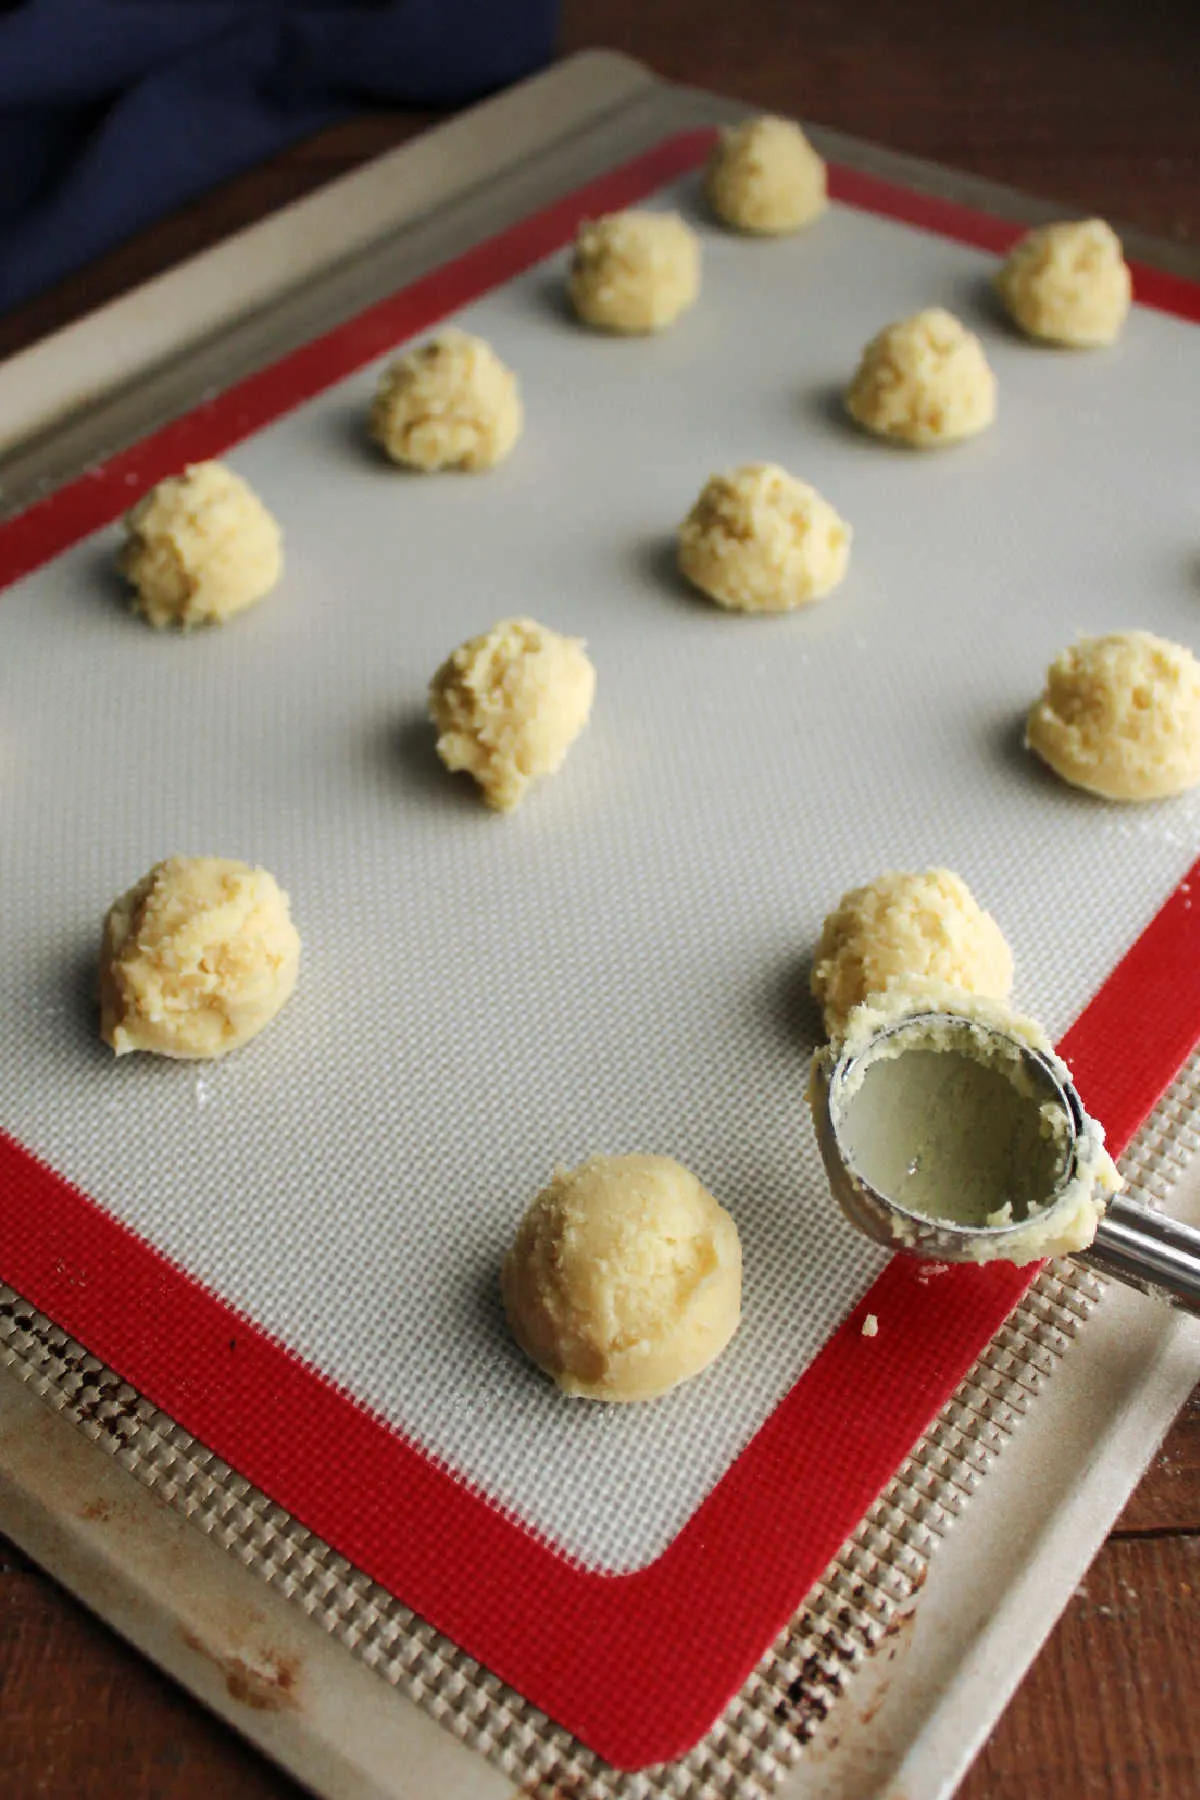 Small scoops of chilled cookie dough, ready to go in the oven.